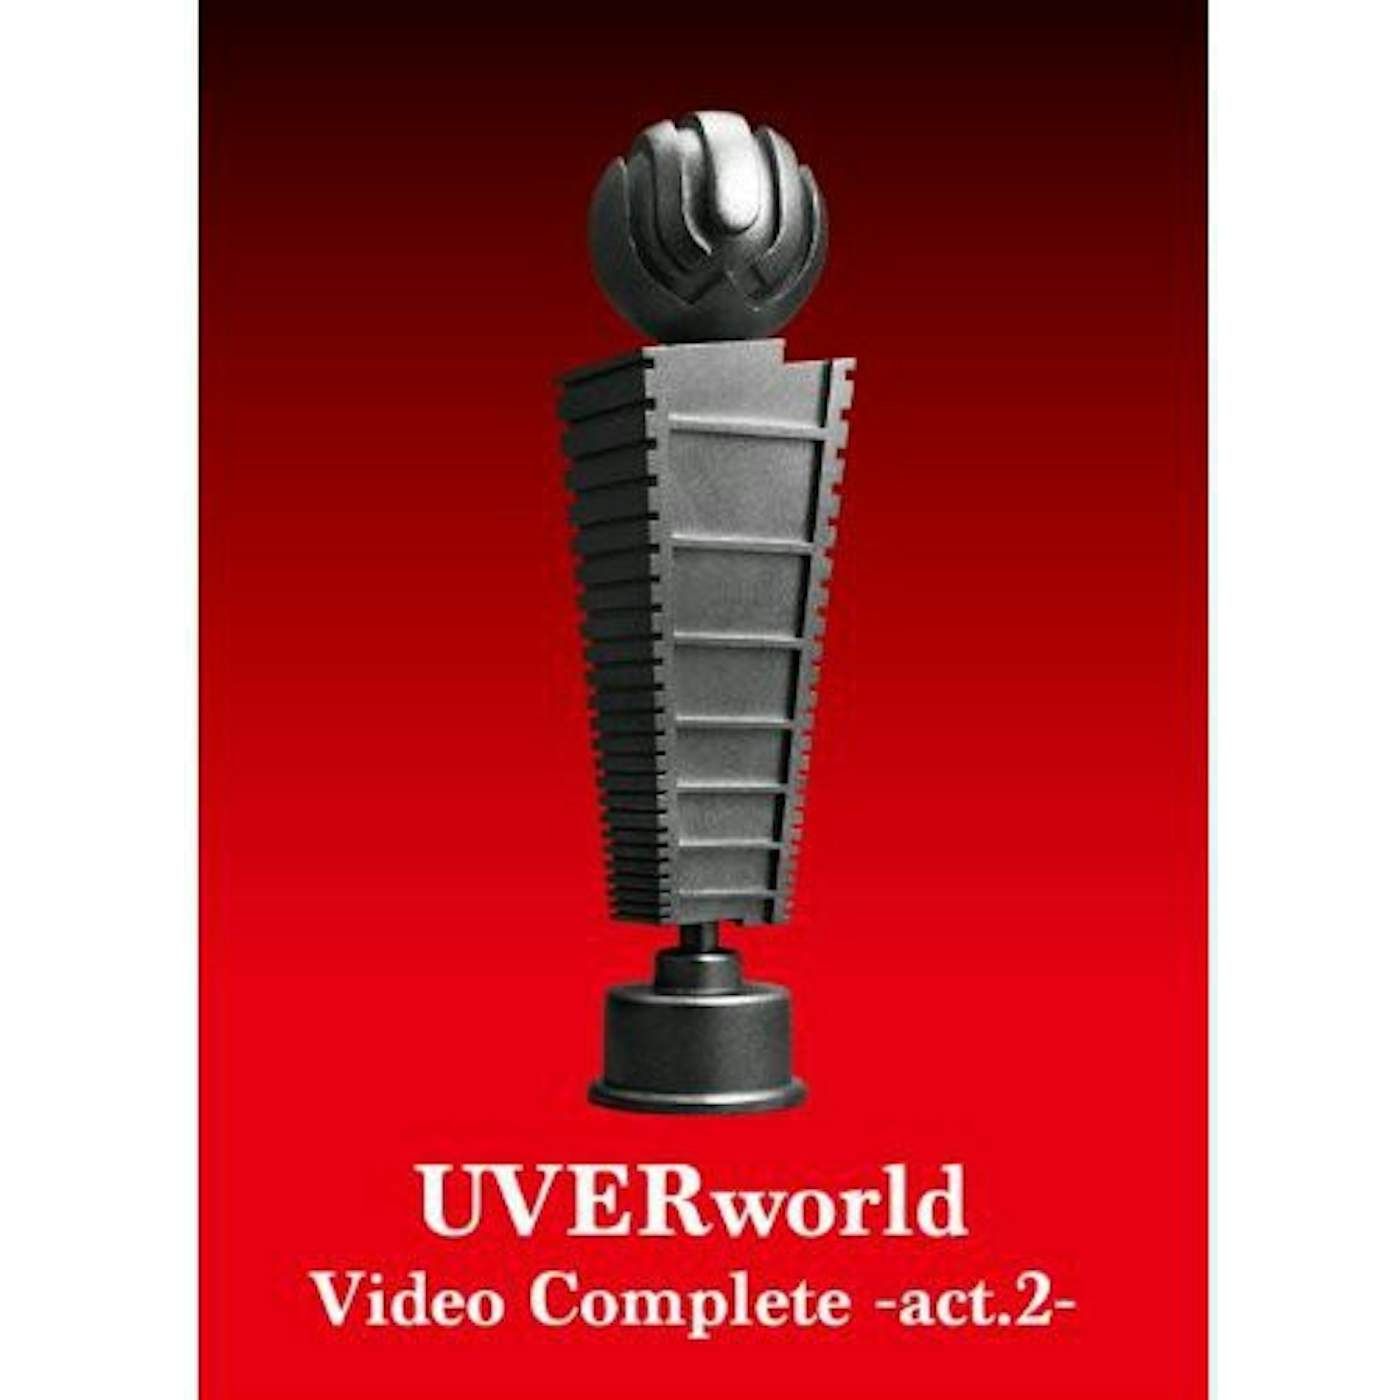 UVERworld VIDEO COMPLETE-ACT. 2 DVD